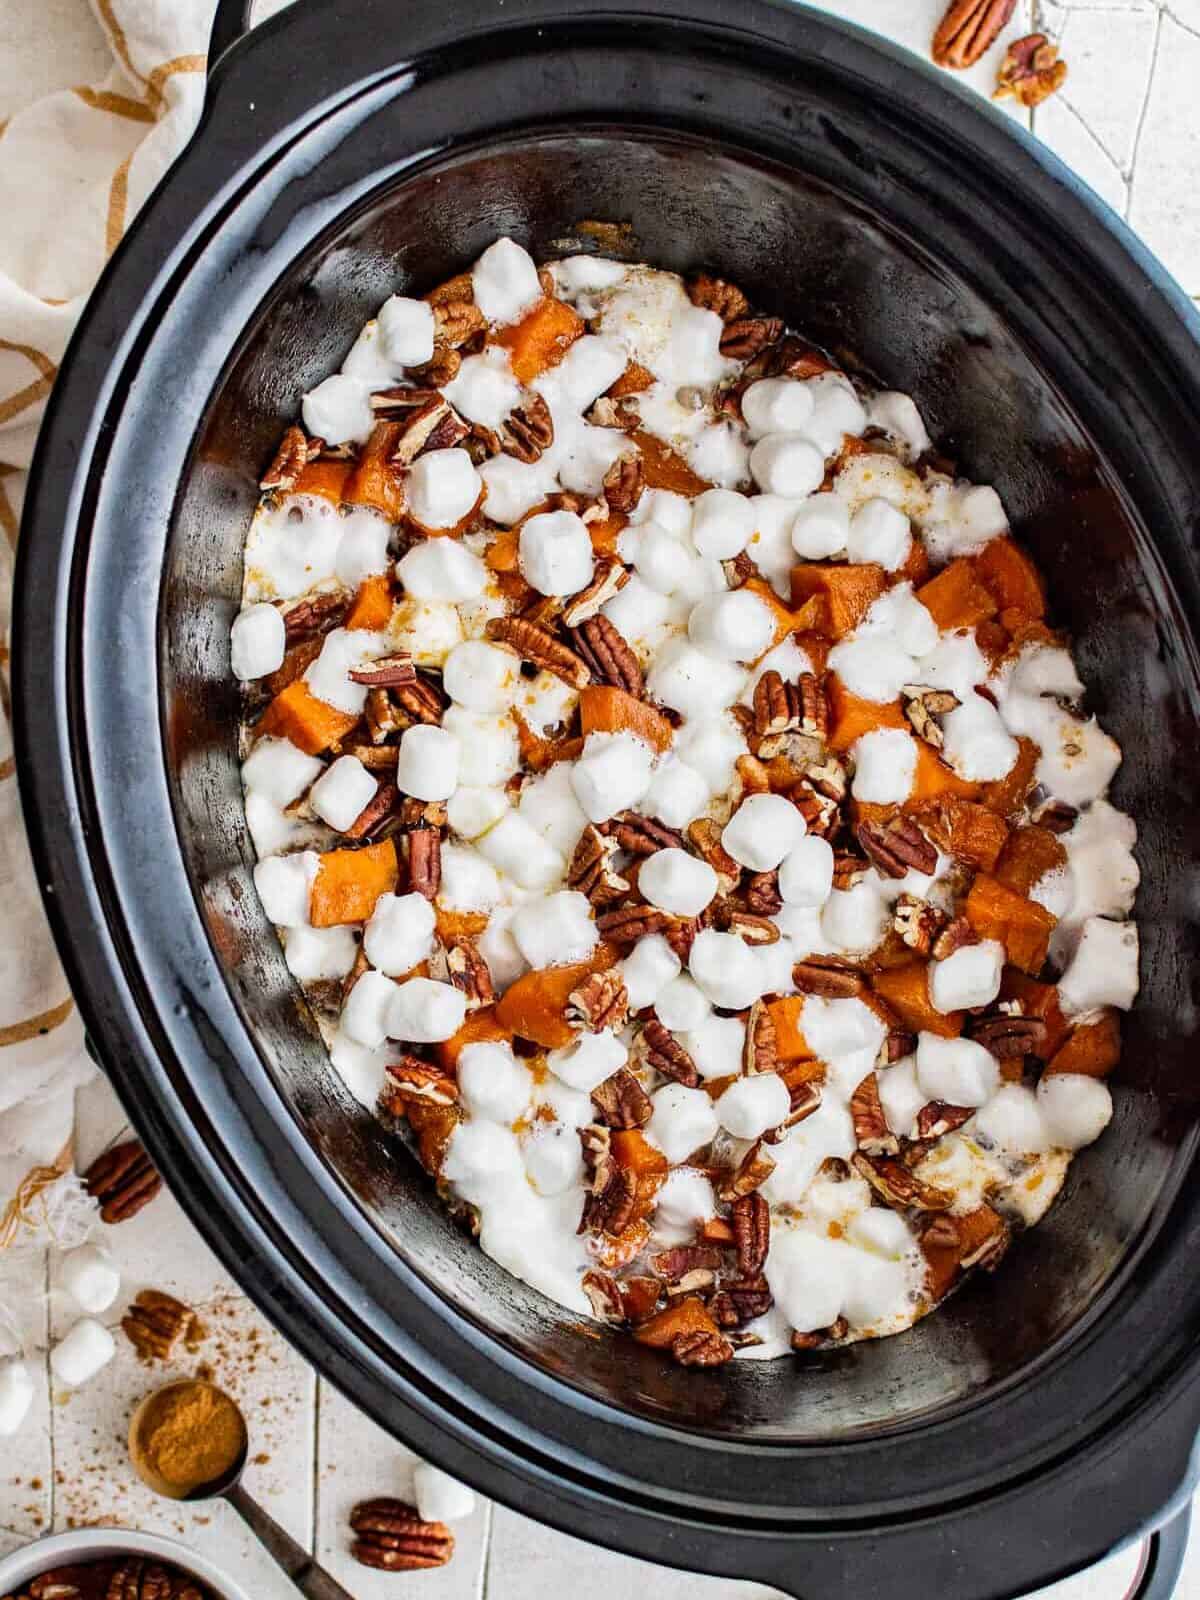 Best Crockpot Recipes - For Breakfast, Lunch, Sides, and Dinners